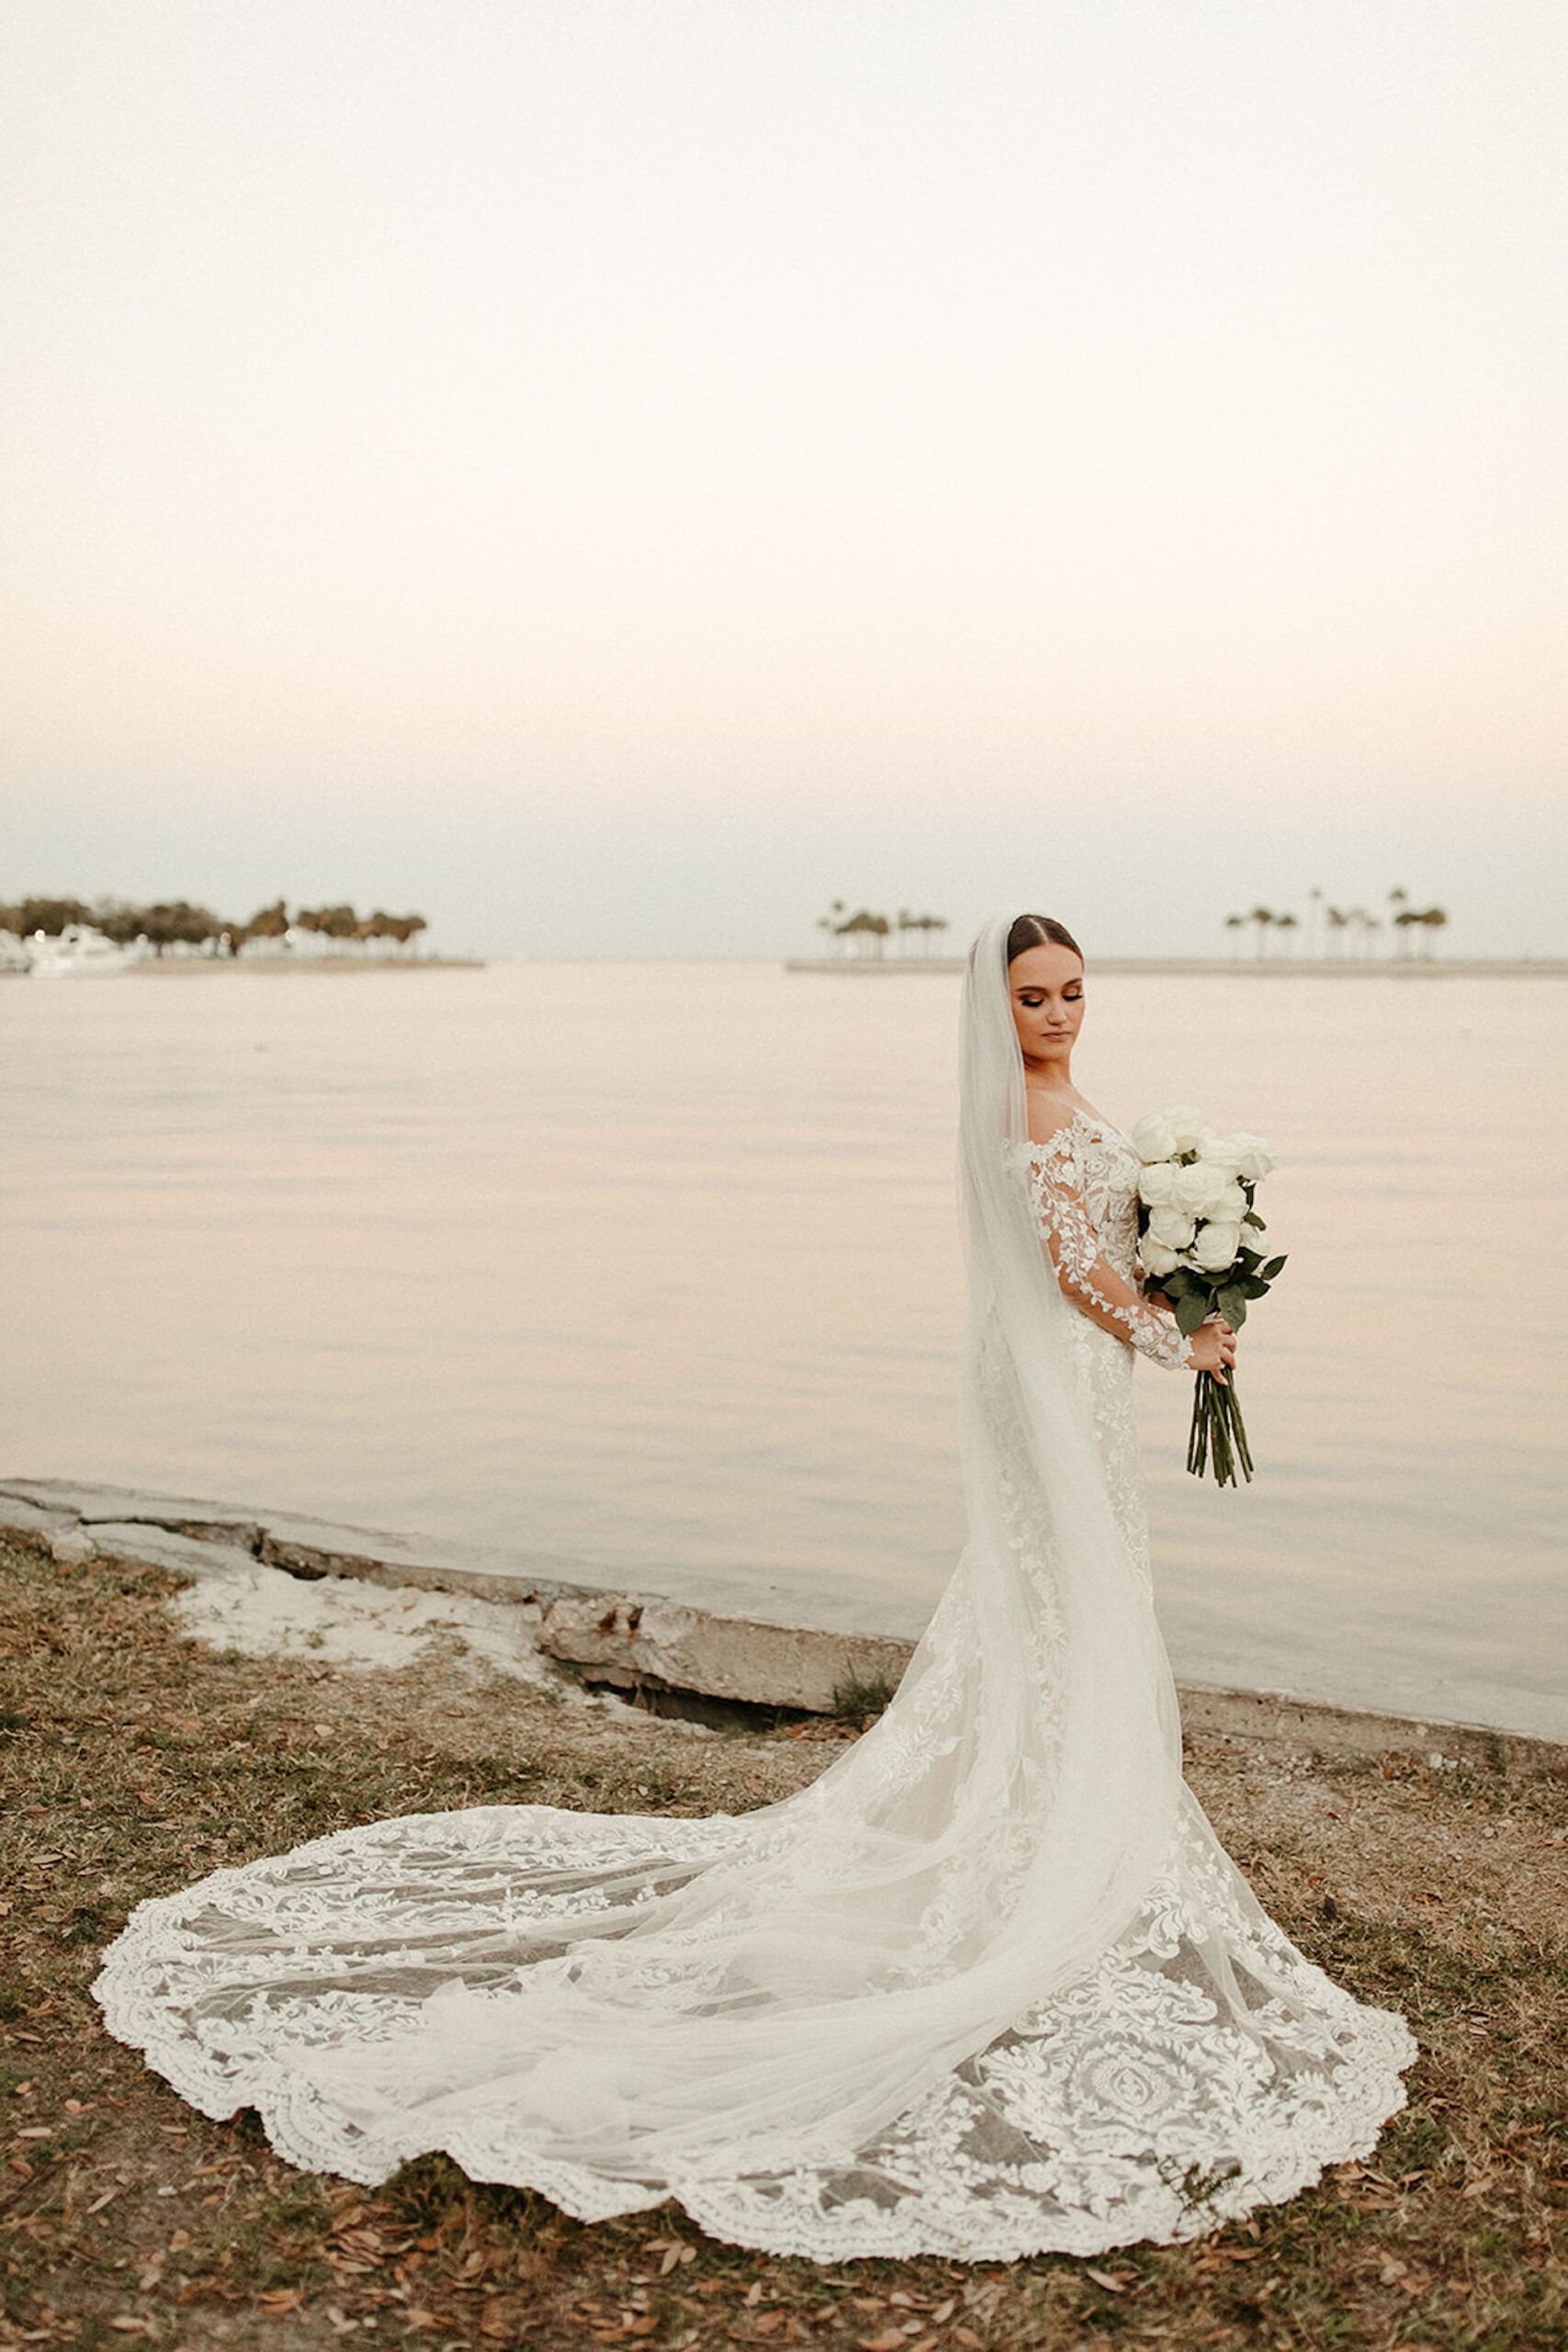 Bride in Long Sleeve Lace Sheer Wedding Dress with White Peony Bouquet and Long Train Veil Sunset Wedding Portrait